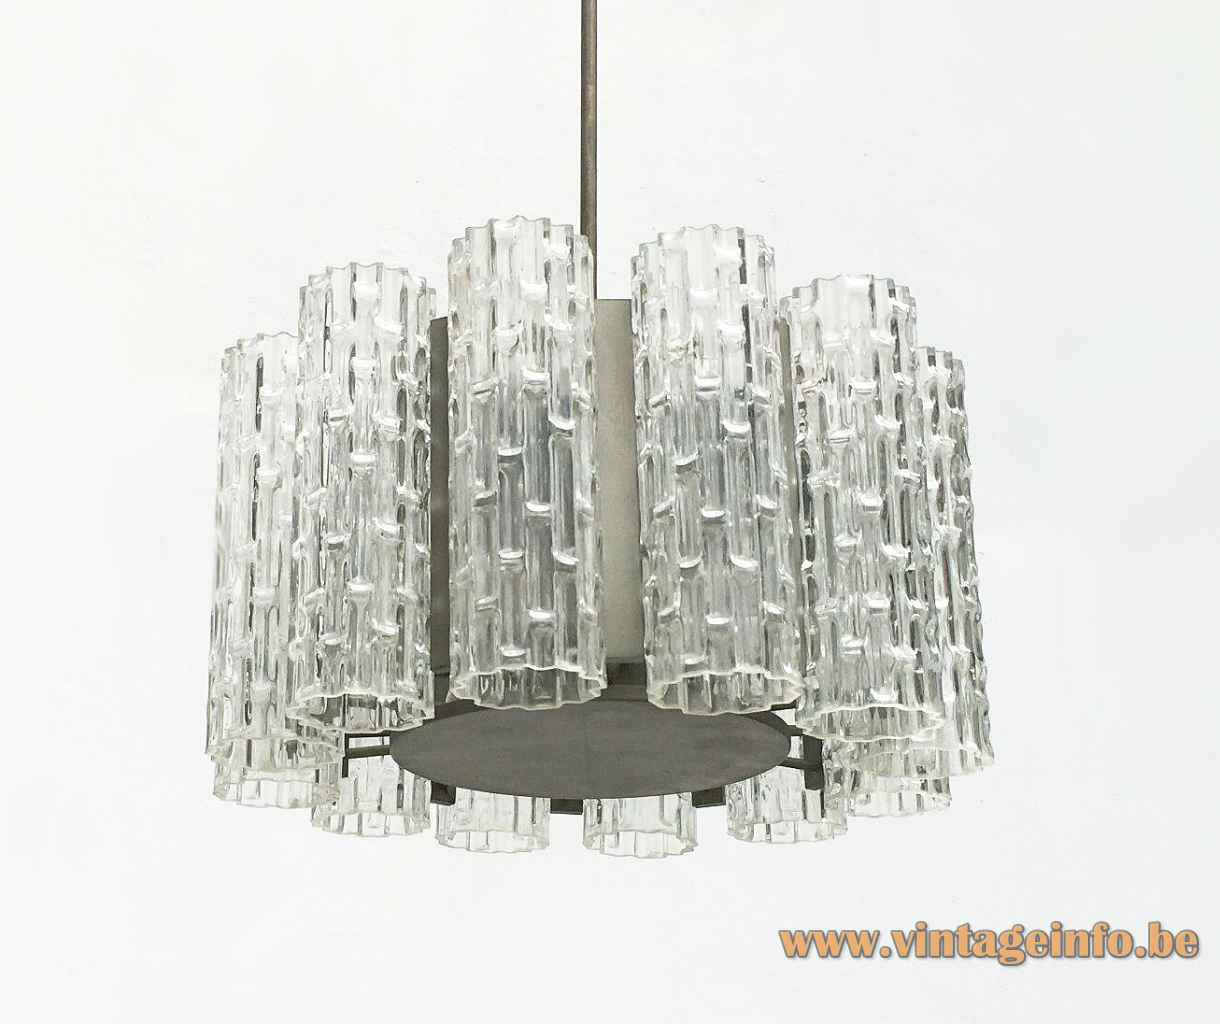 DORIA big glass tubes chandelier embossed ring lampshade metal disc & rod 1960s 1970s Germany E14 sockets